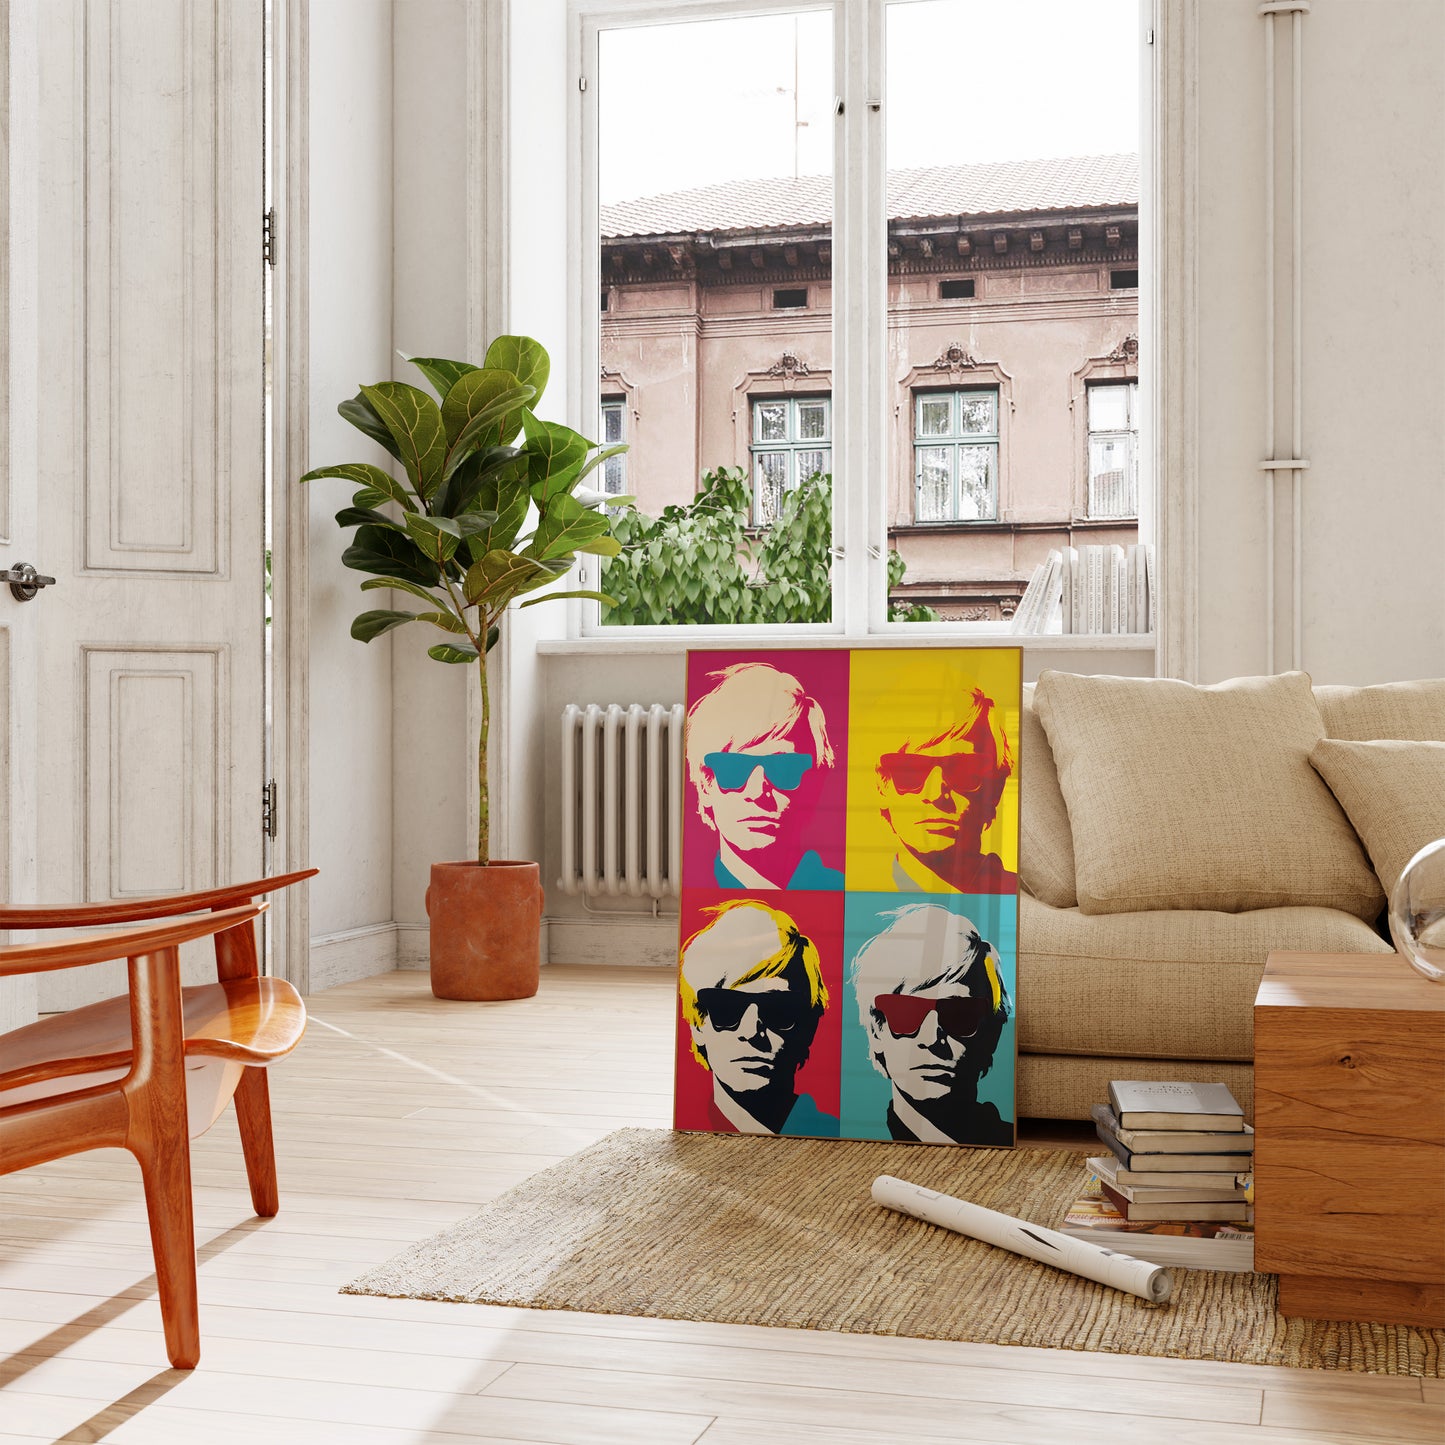 Bright pop art portraits on canvas in a stylish living room with natural light.